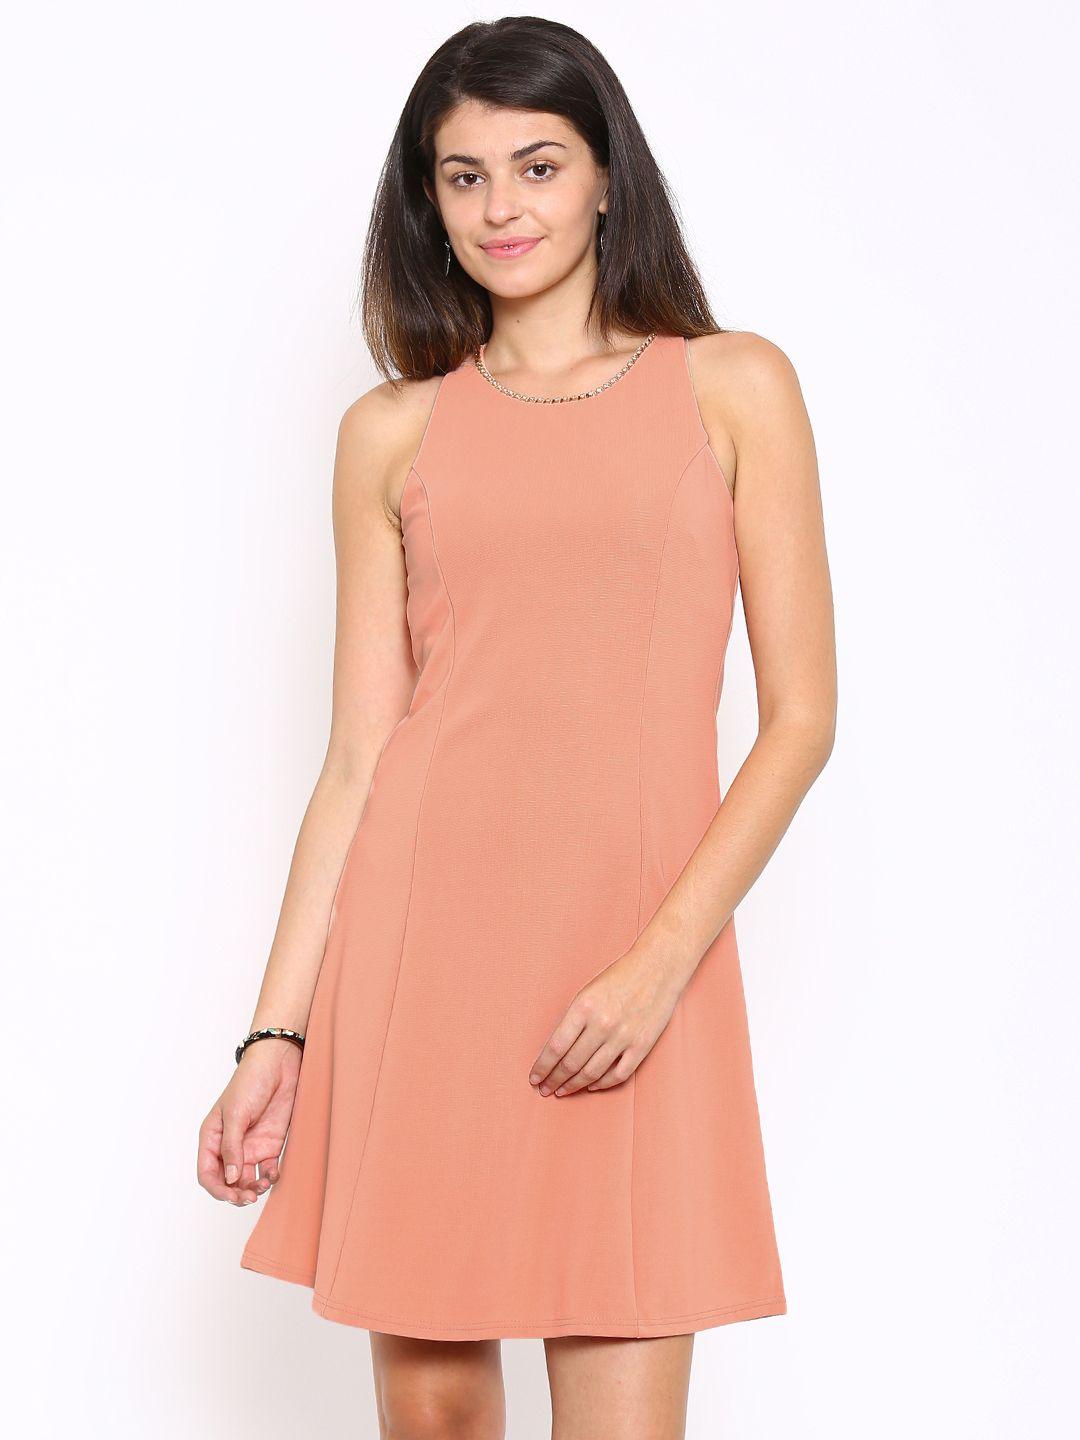 deal jeans women peach-coloured solid fit & flare dress